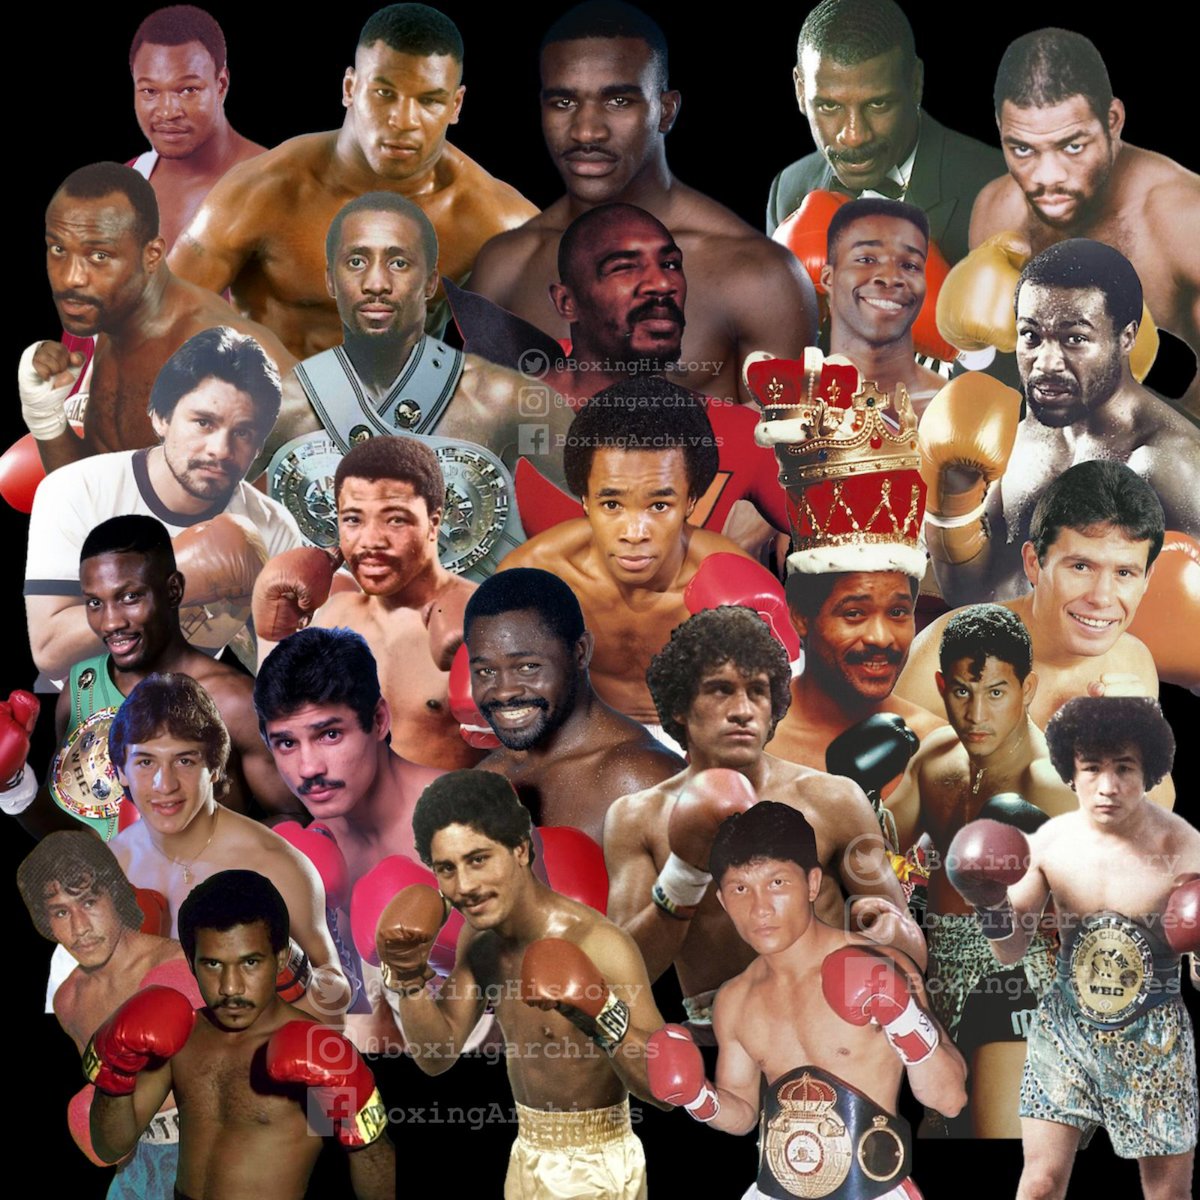 When they ask why you loved 1980s boxing, show them this.